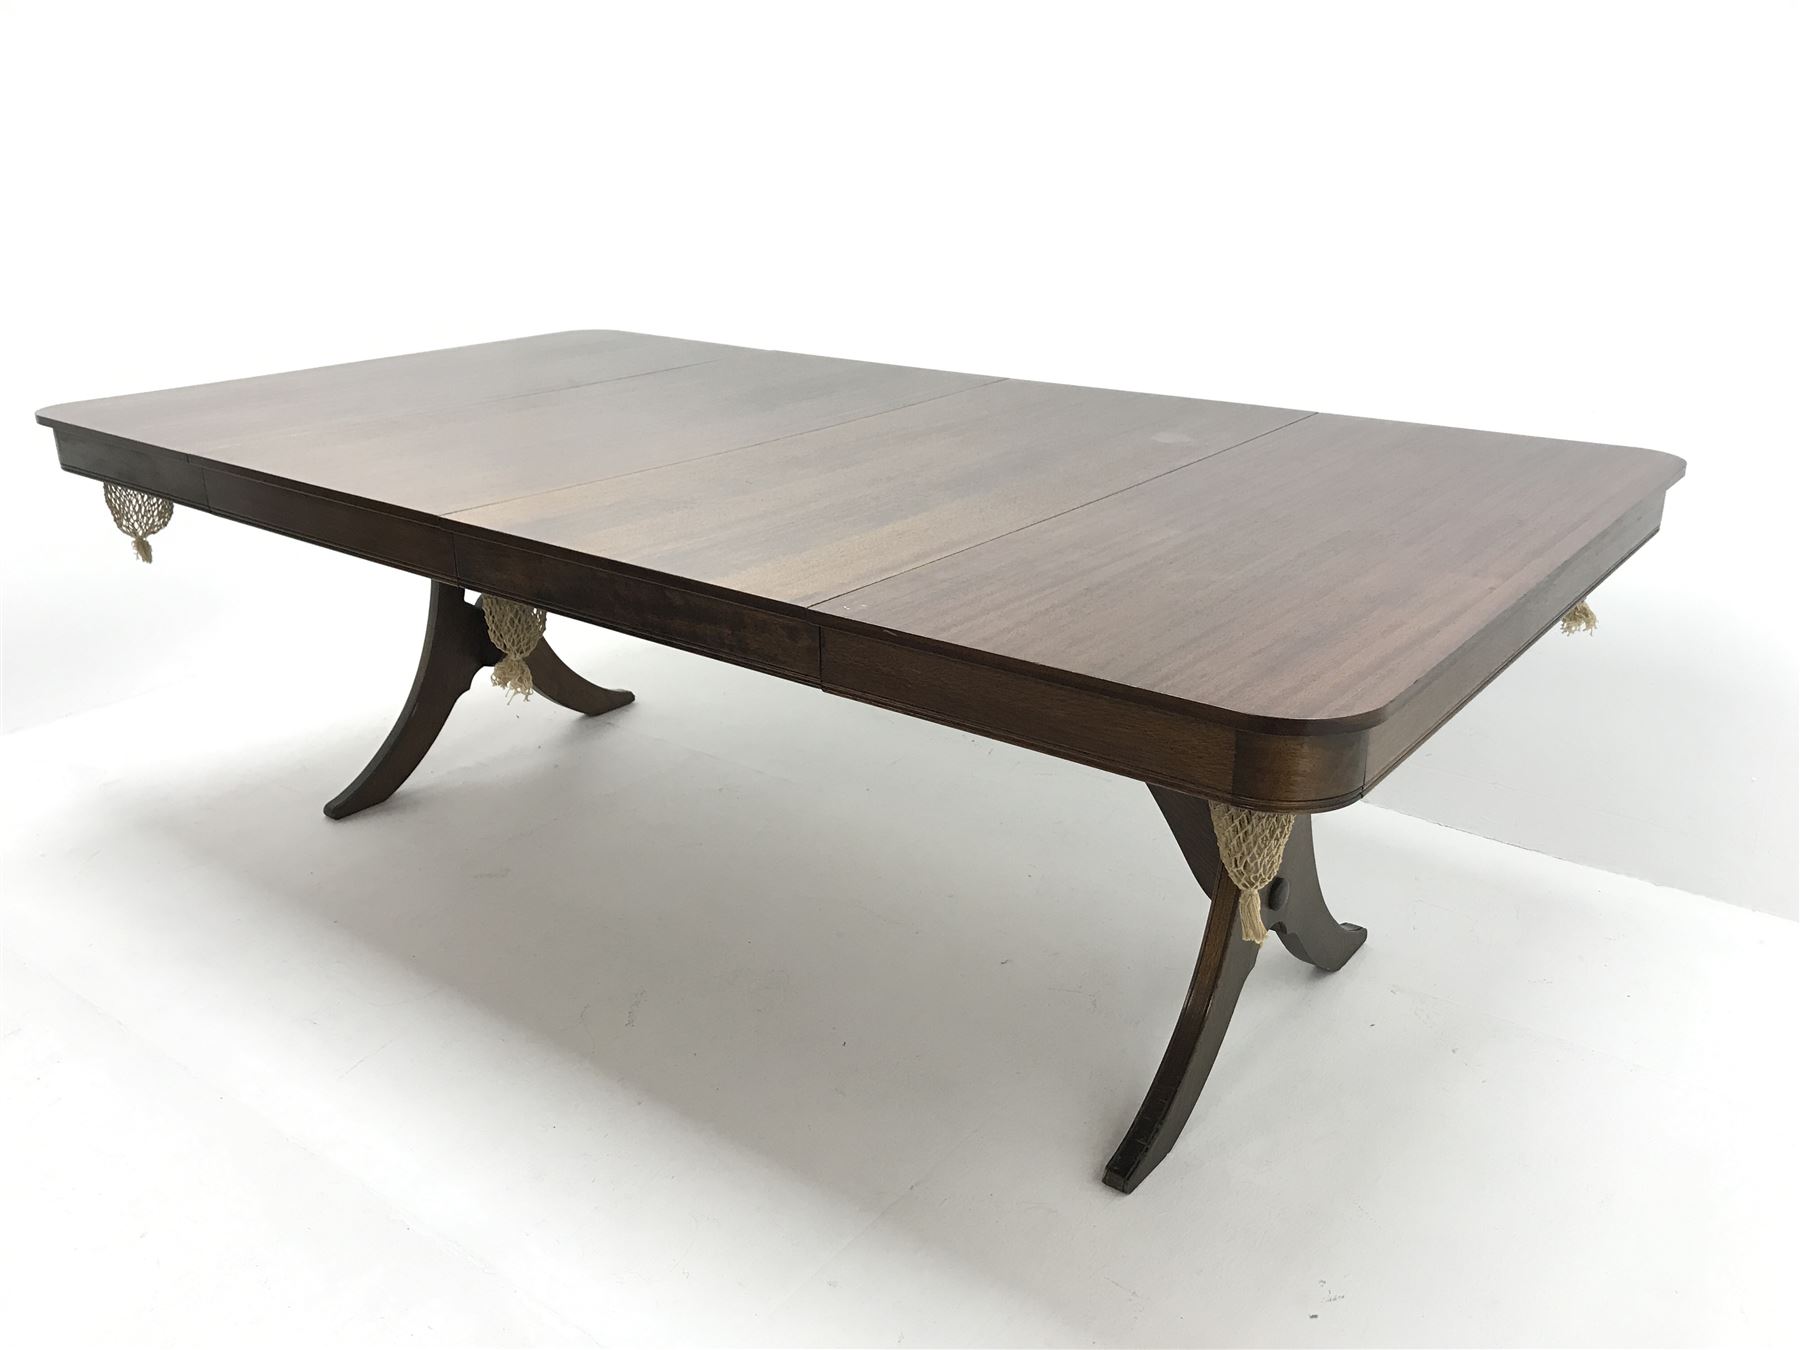 Allied Billiards slate bed snooker dining table - Image 6 of 7